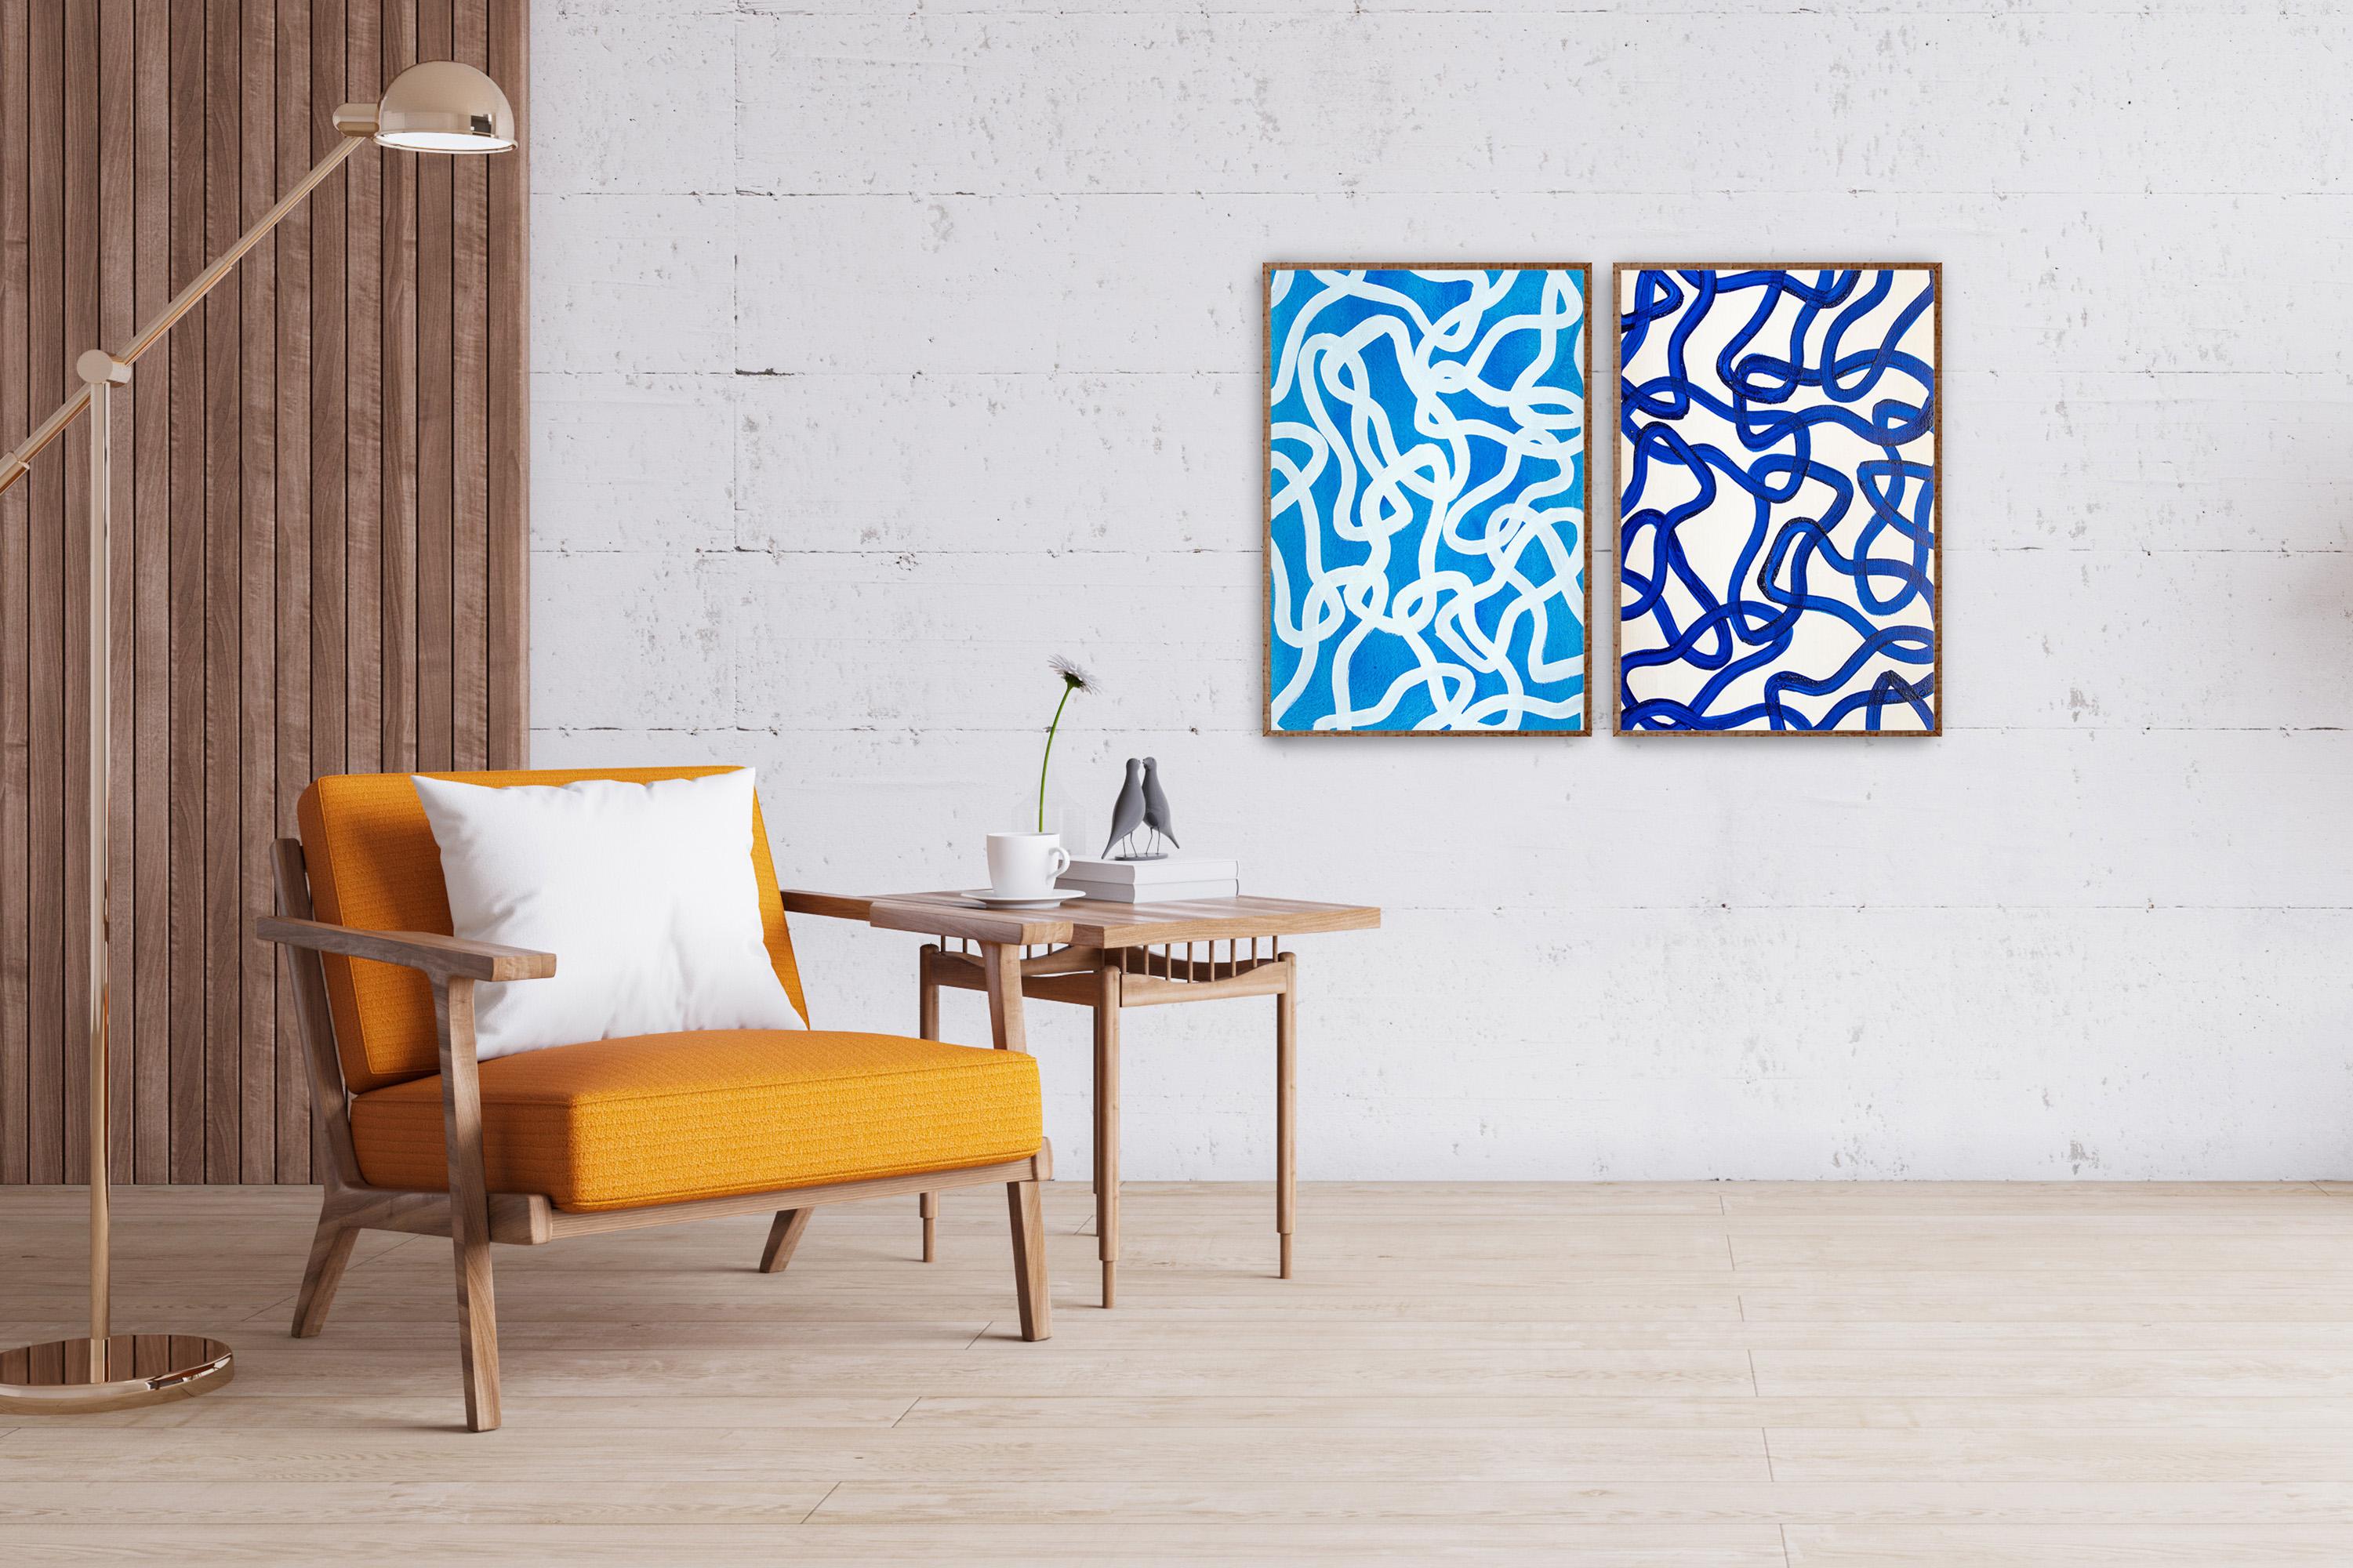 Blue and White Diptych, Overlapping Abstract Fish Gestures, Mediterranean, Salty - Gray Abstract Painting by Enric Servera